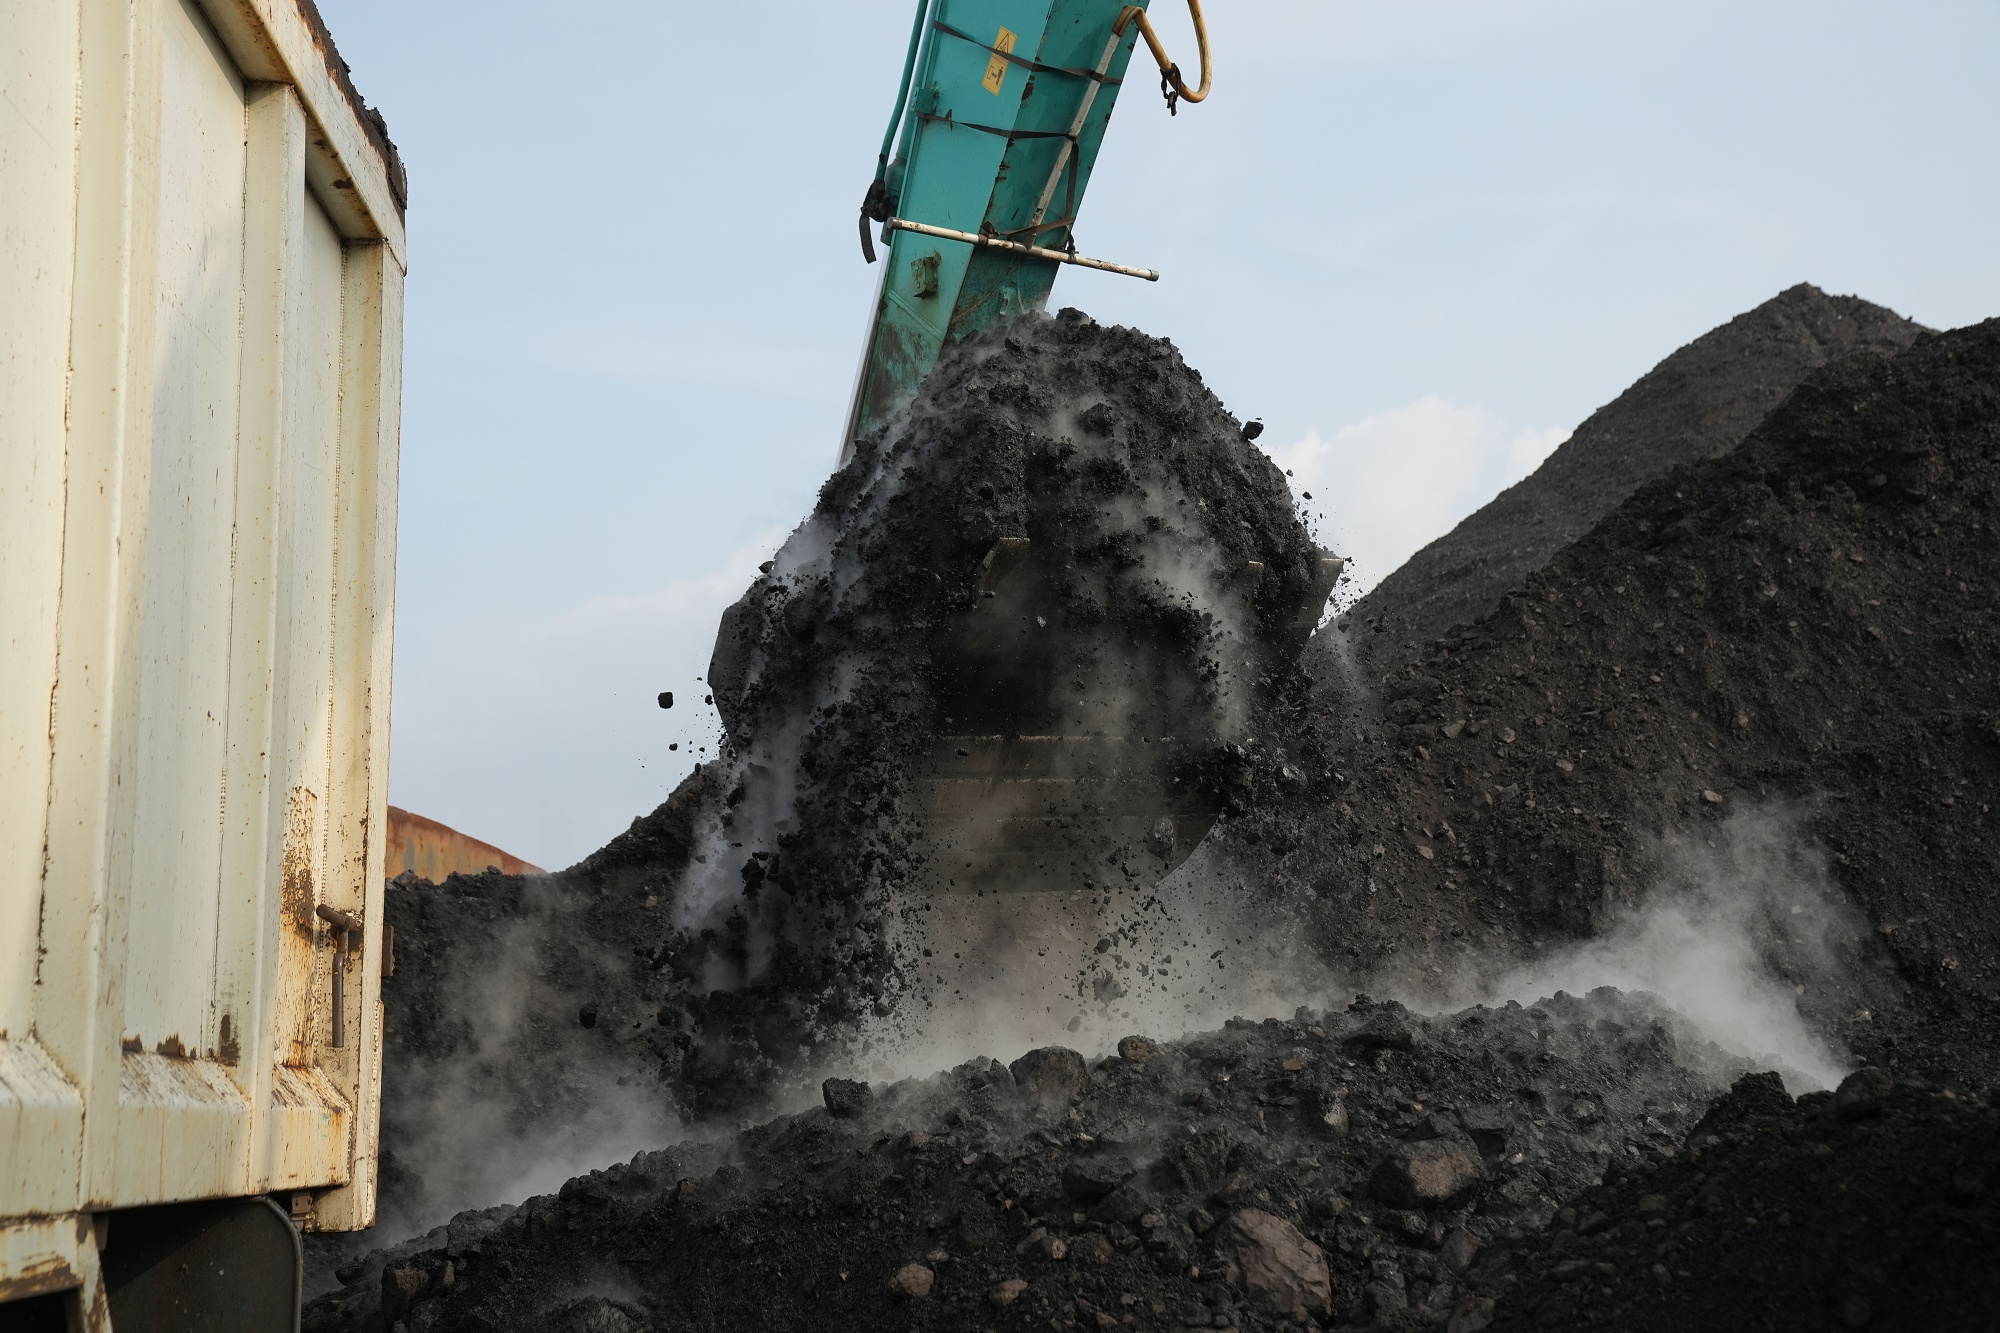 An excavator loads coal onto a dump truck at Cirebon Port in West Java, Indonesia.